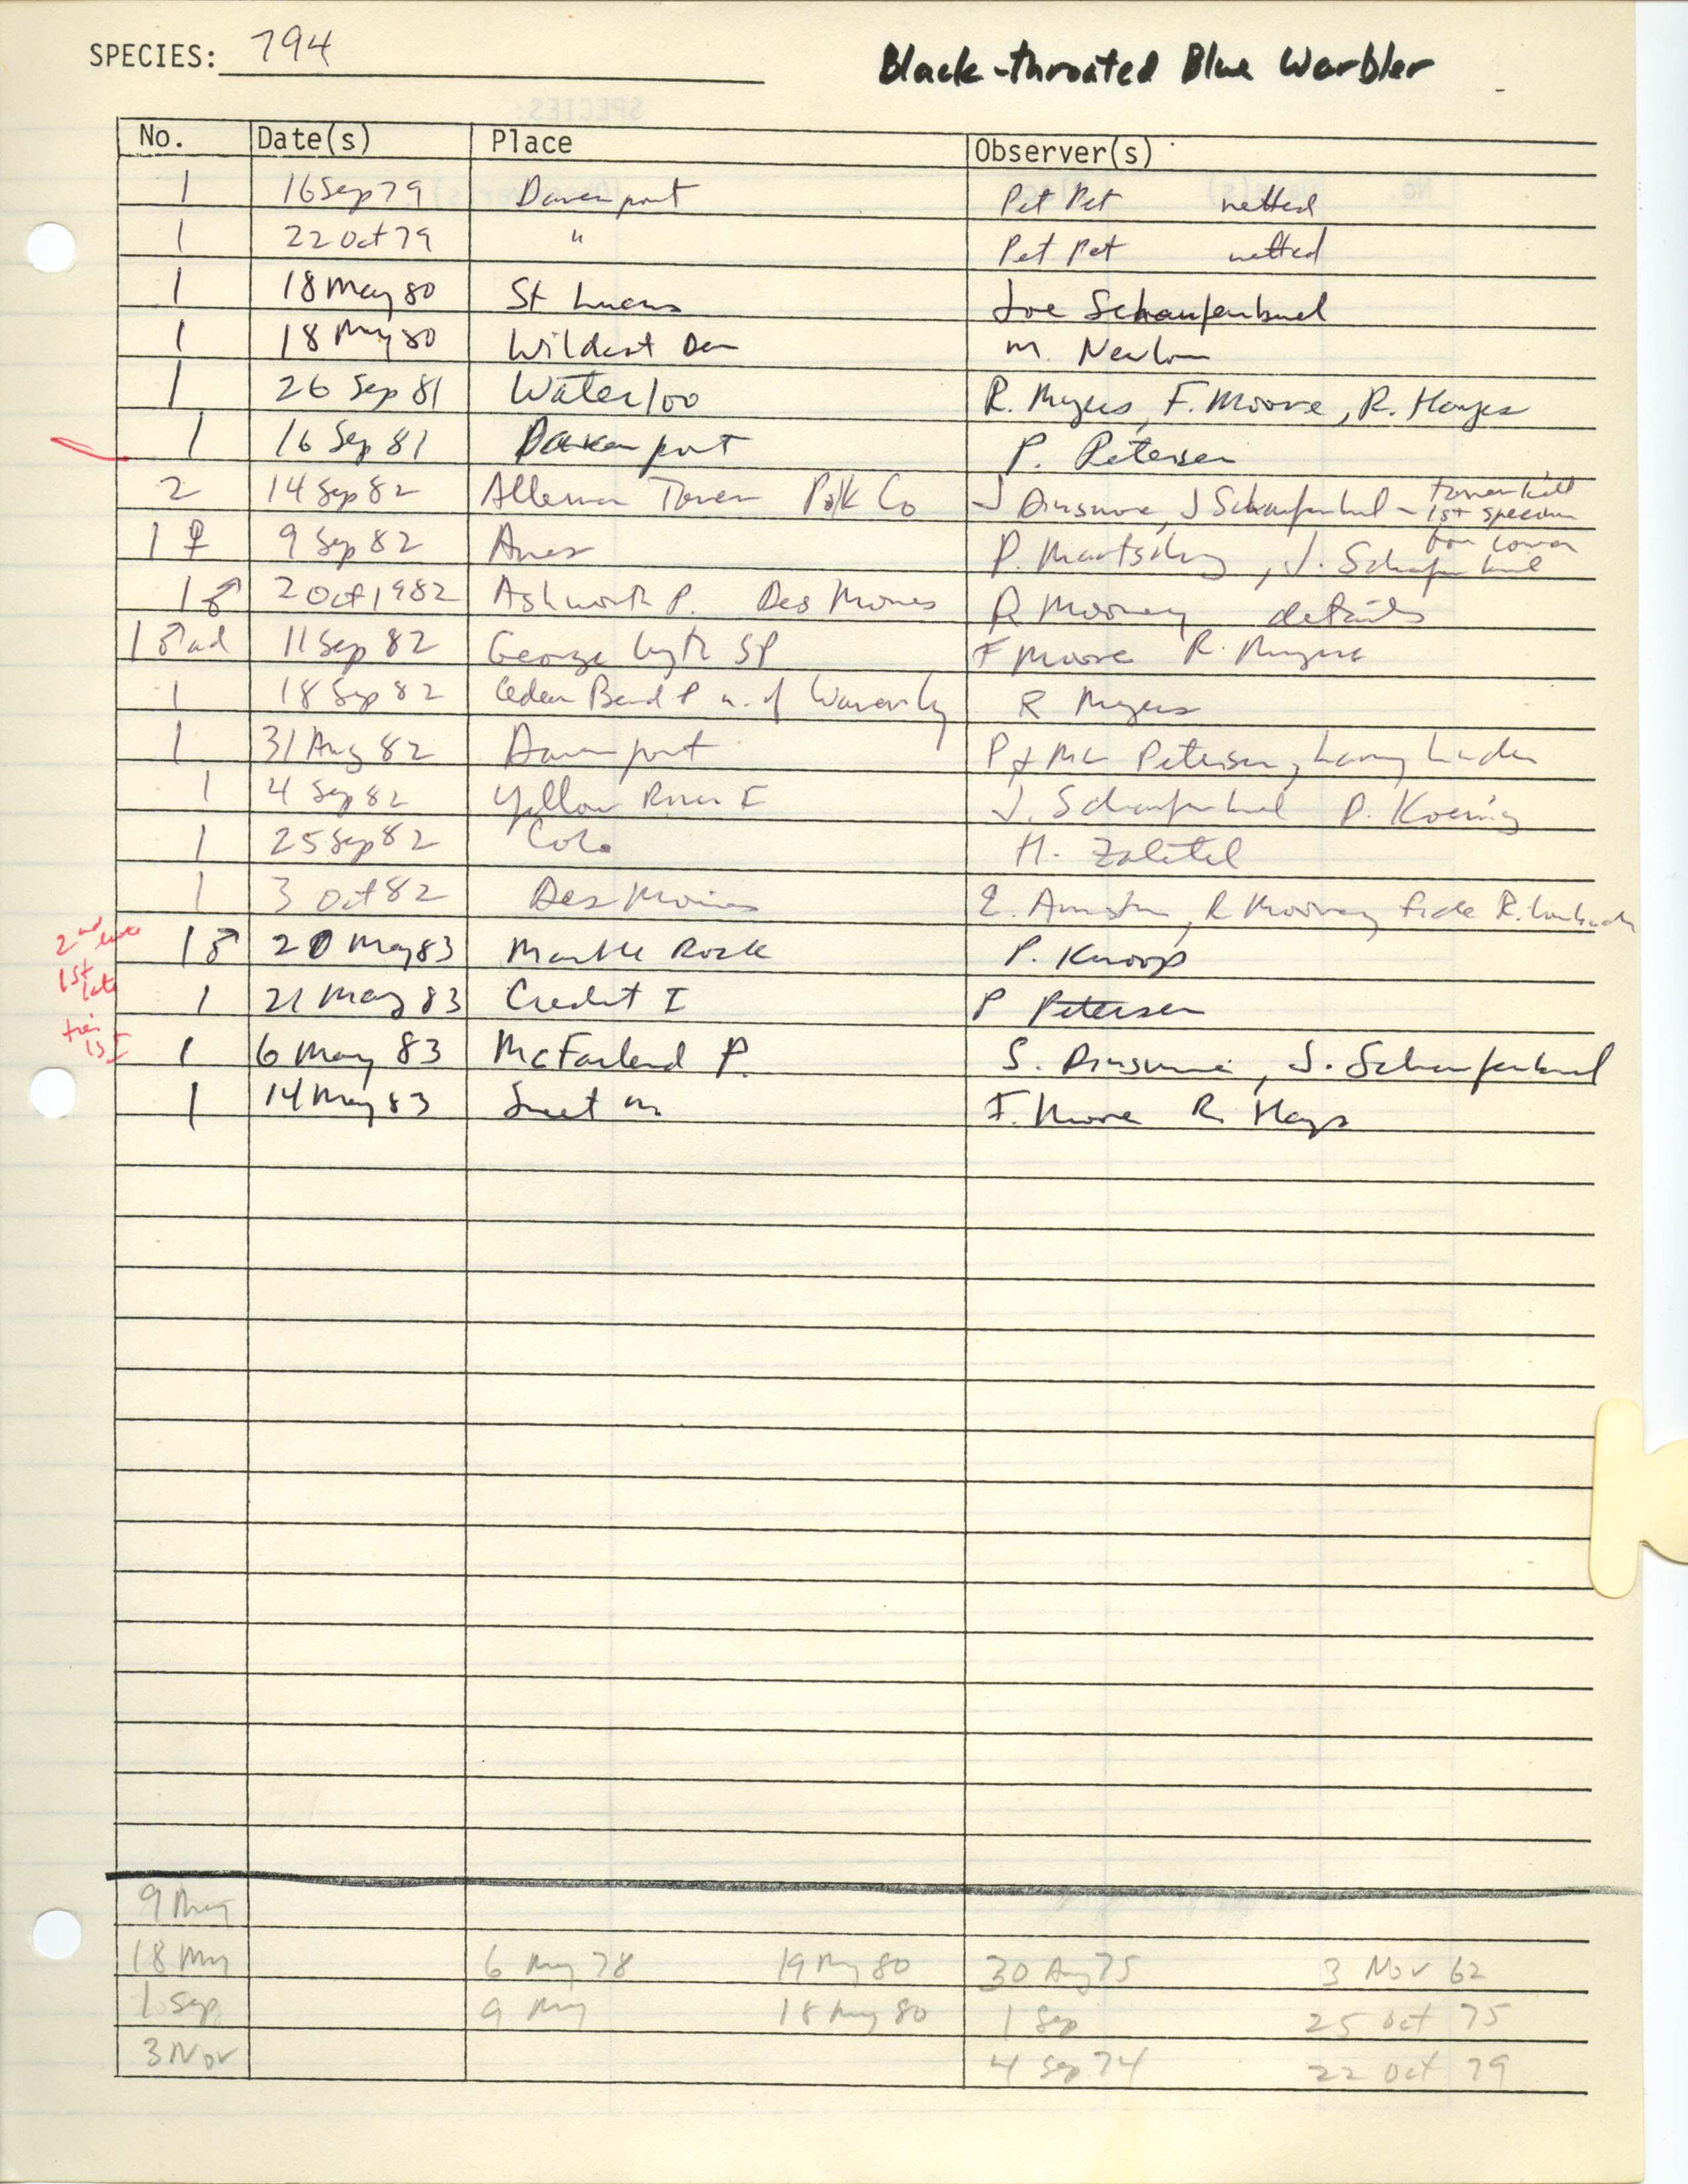 Iowa Ornithologists' Union, field report compiled data, Black-throated Blue Warbler, 1979-1983